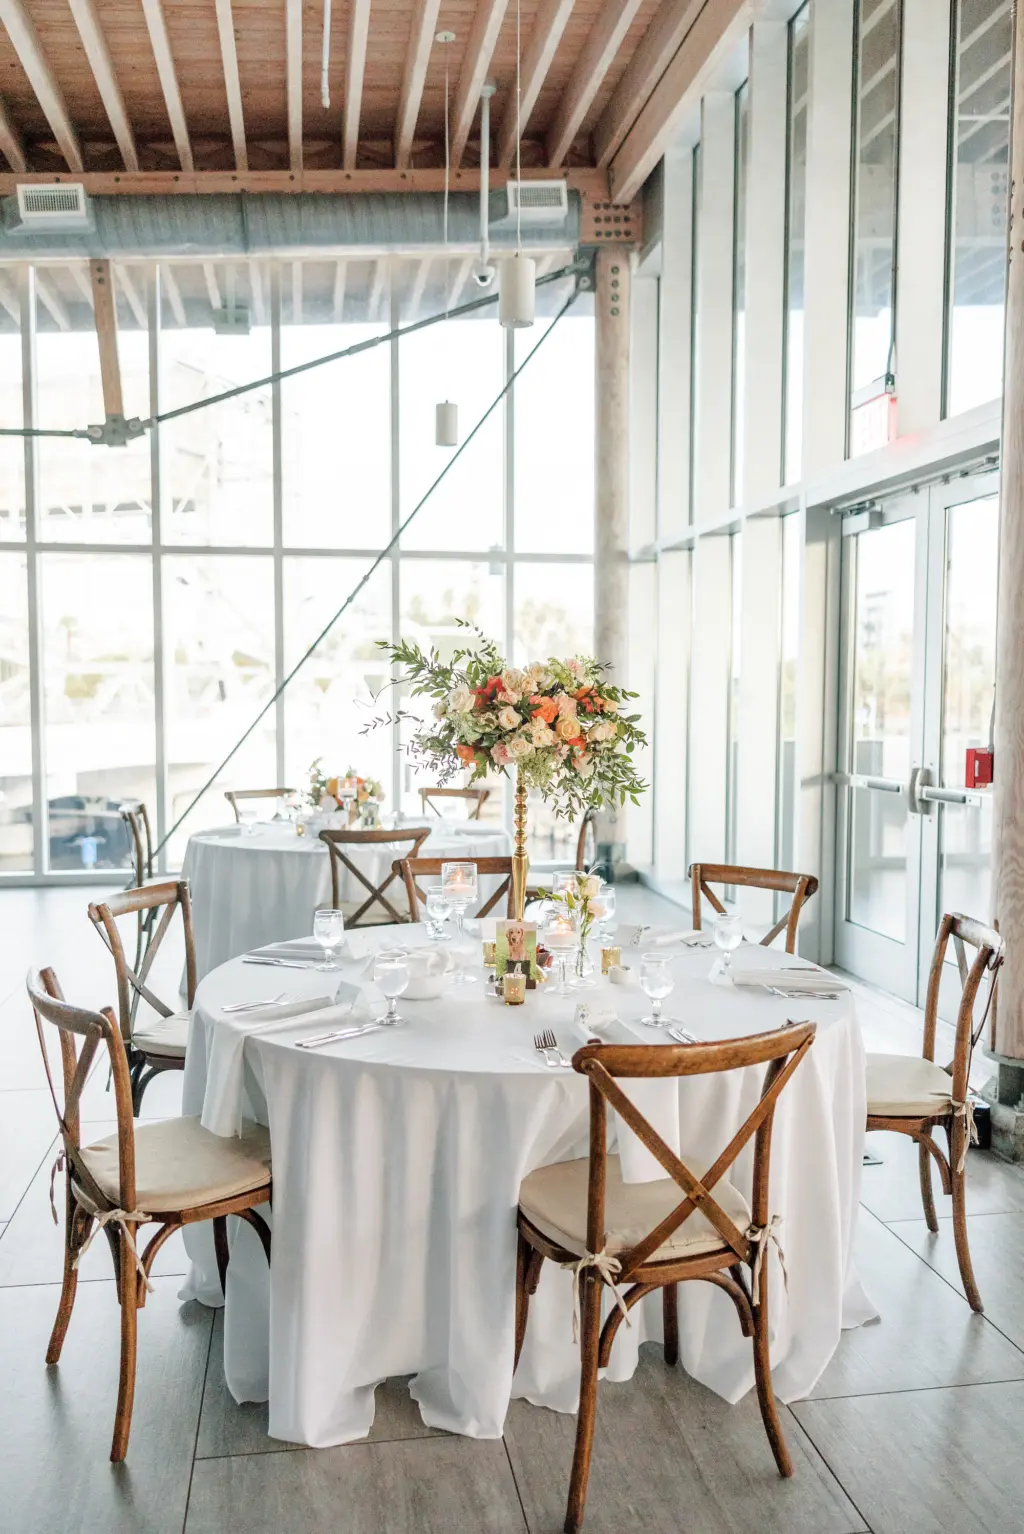 Elegant Garden Wedding Reception Decor Inspiration | Rustic Wooden Crossback Chairs | Floating Candles | Tall Flower Stand Centerpieces with Peach Orange Roses and Greenery Ideas | Tampa Bay Caterer Elite Events and Catering